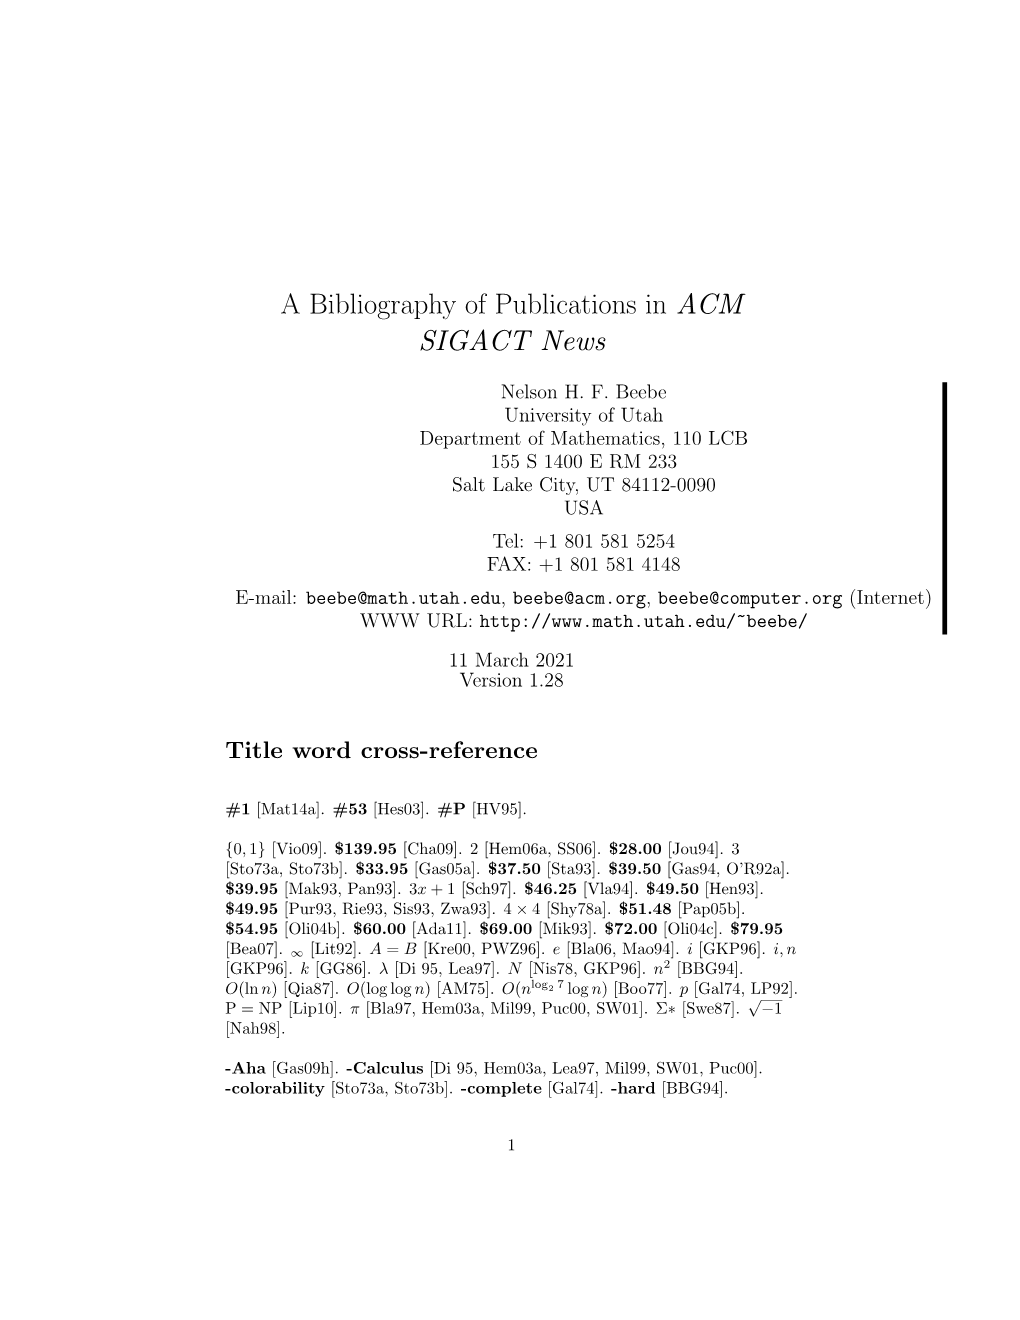 A Bibliography of Publications in ACM SIGACT News